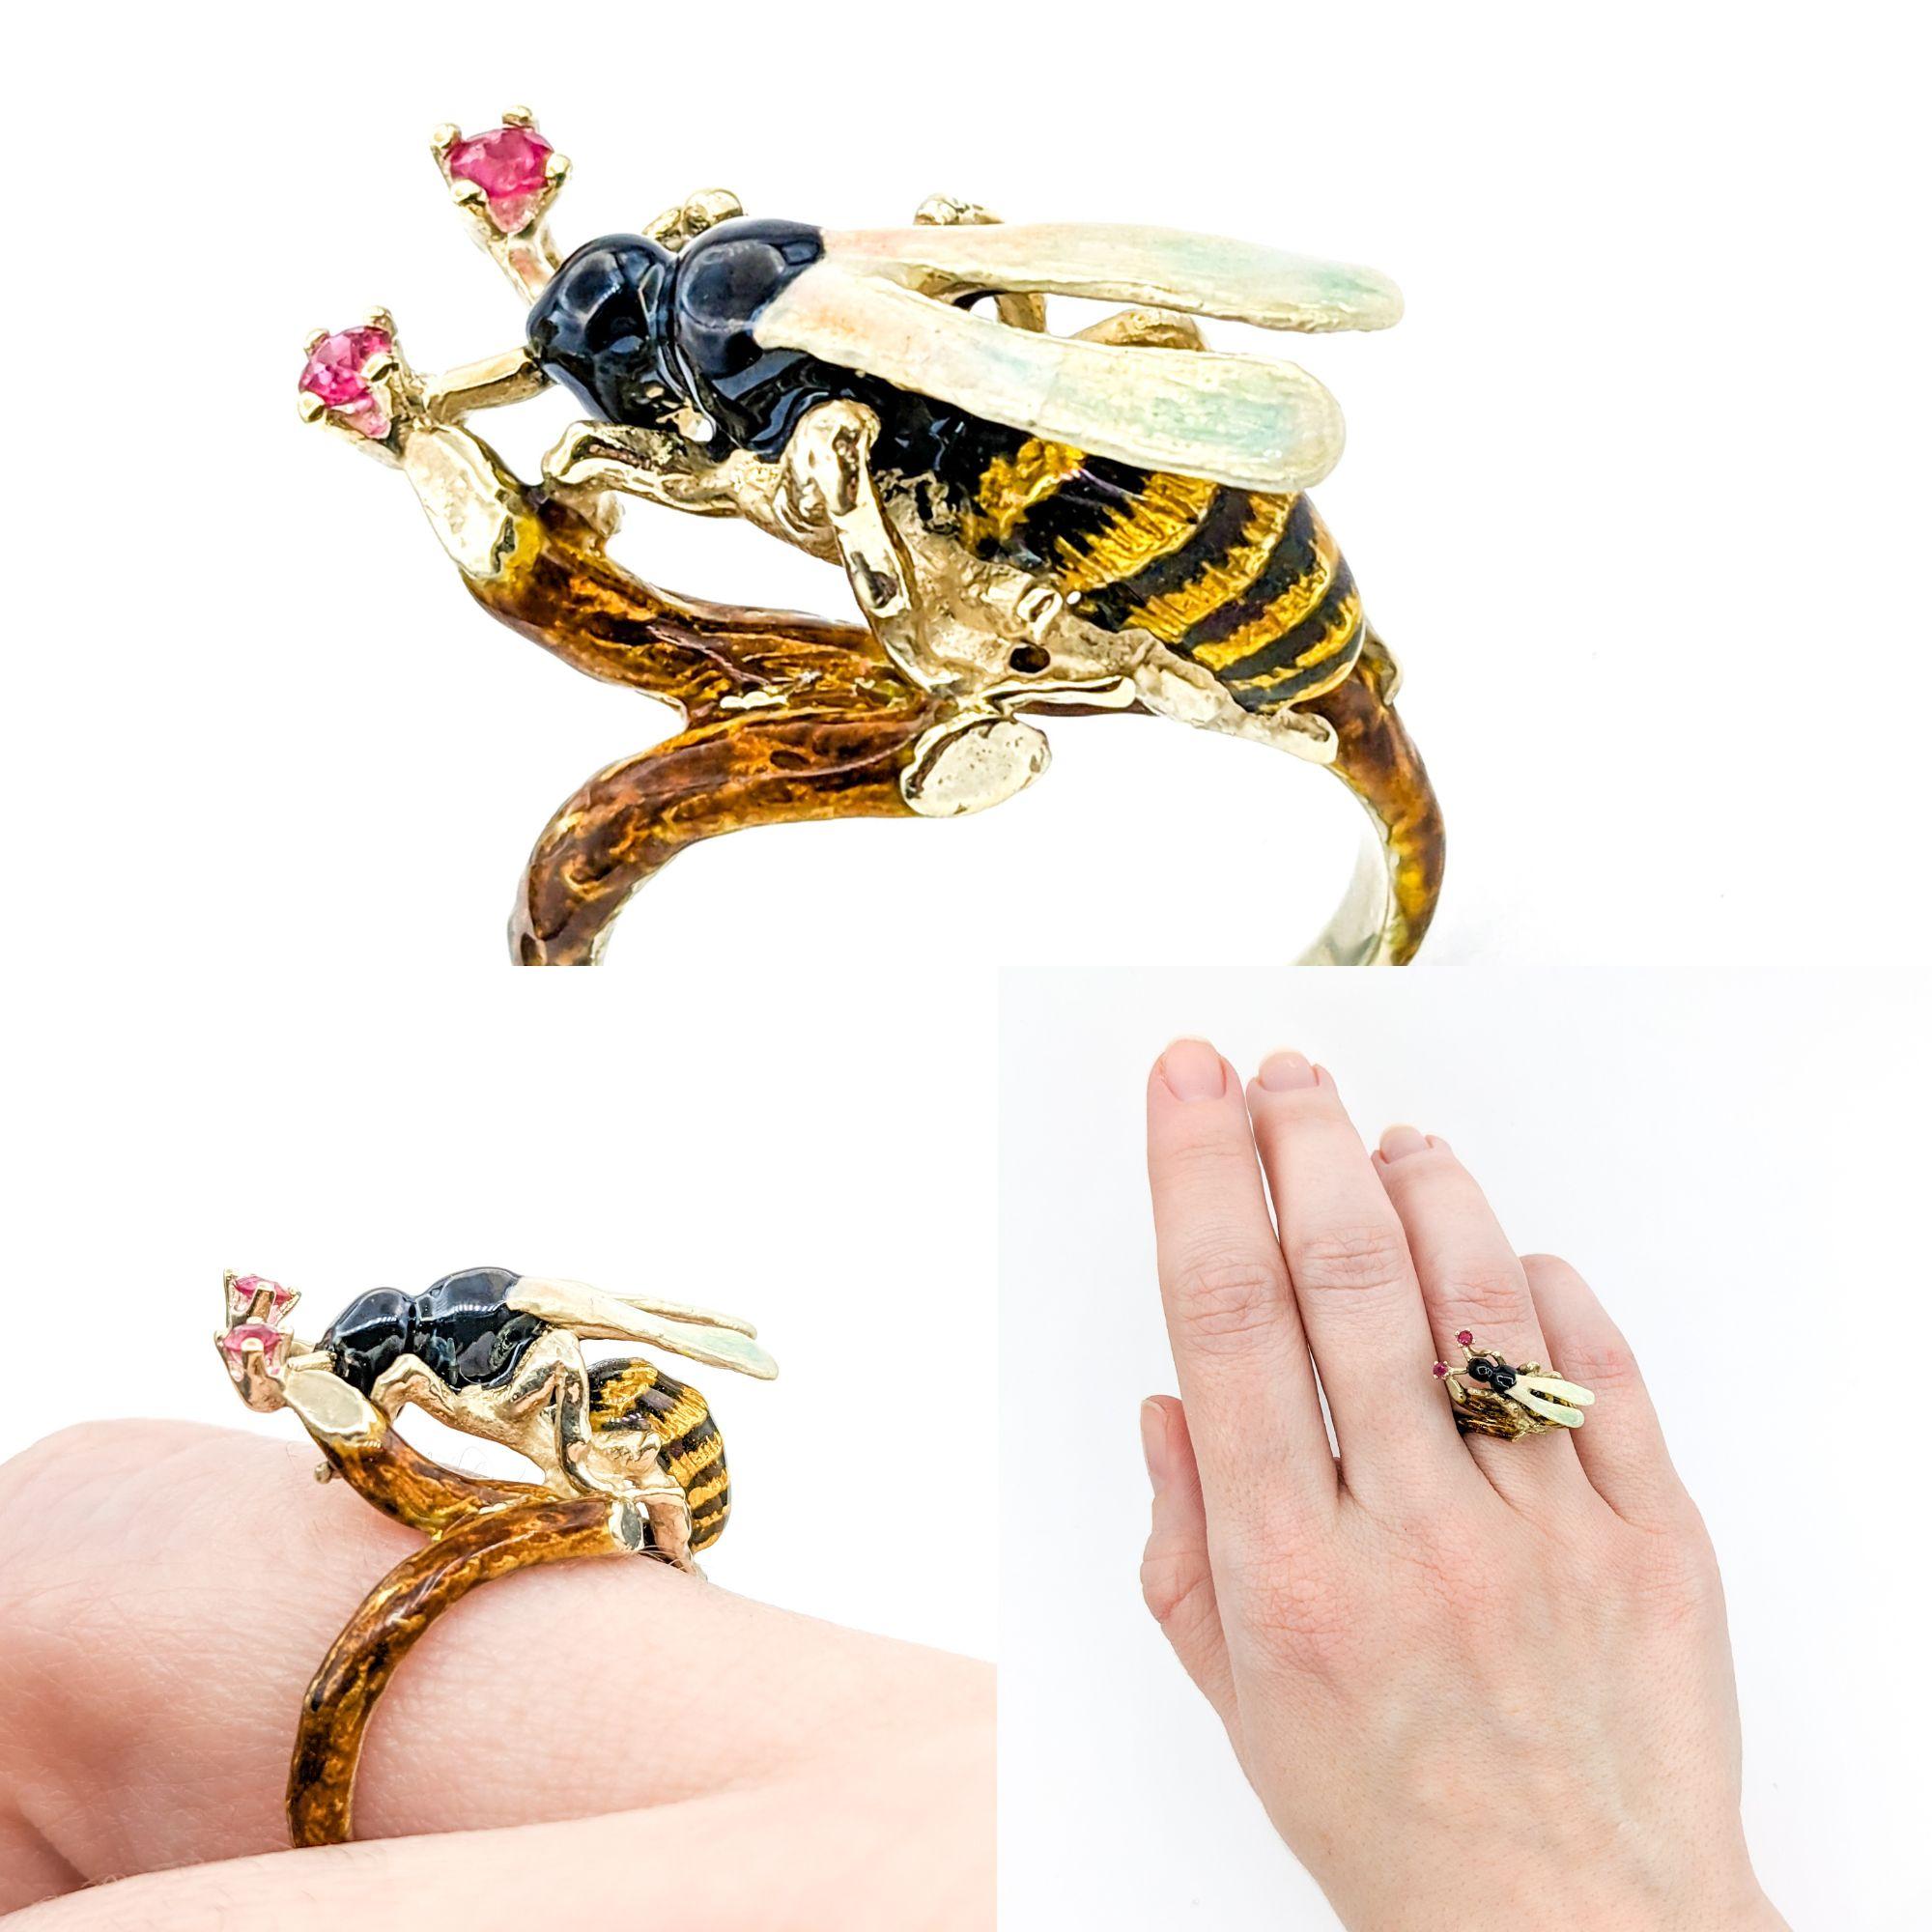 Vintage Figural Enamel Wasp Insect Ring with Rubies In Yellow Gold

Embrace the charm of this truly unique insect ring, meticulously crafted in 14k yellow gold. This ring features a delightful and realistic Wasp design with rich enamel colors and